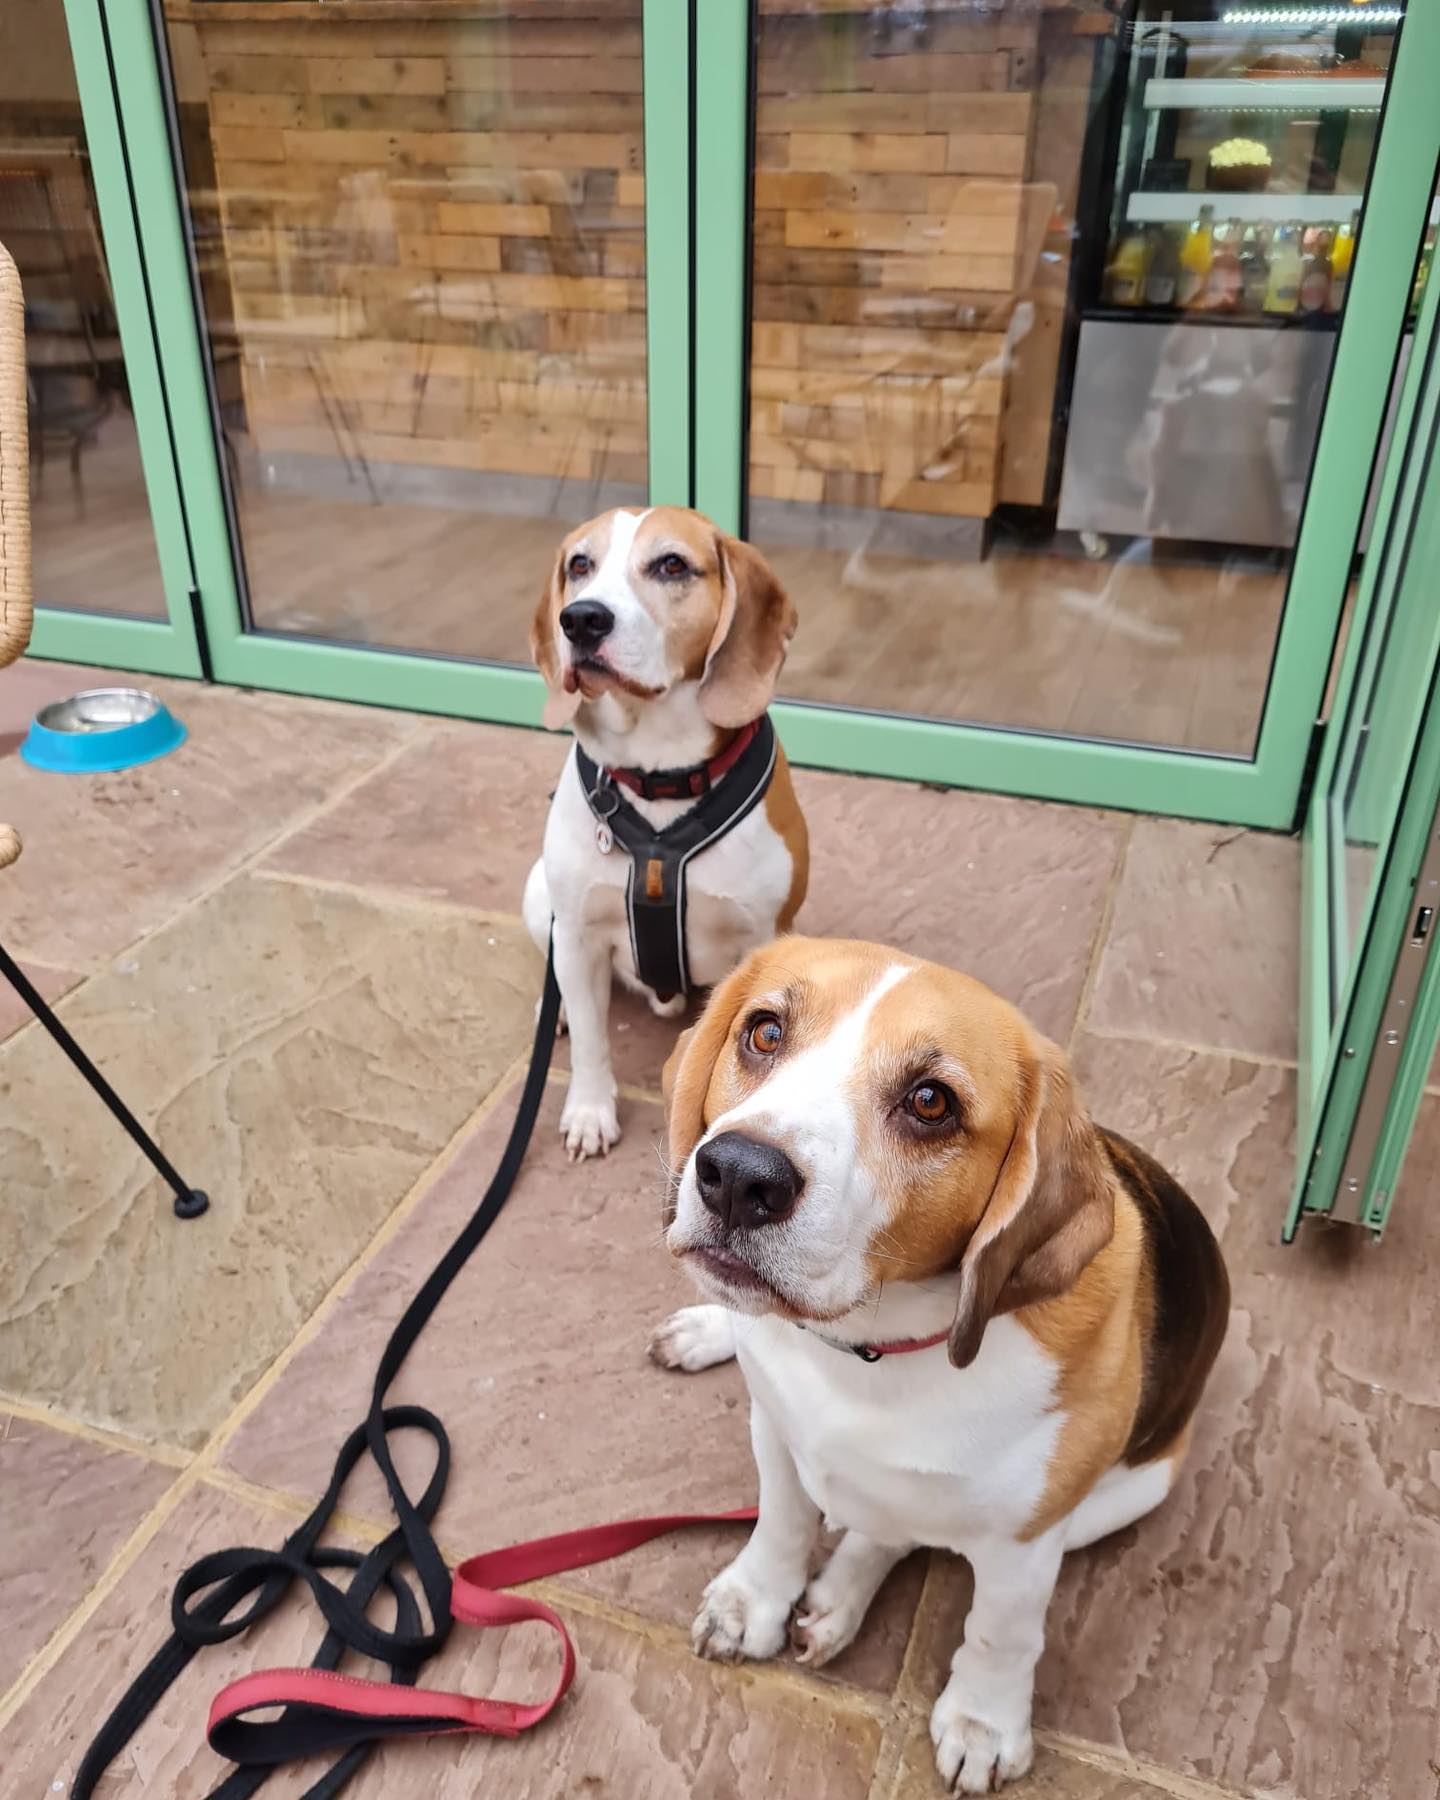 We had the best visitors today, aren't they the cutest! Thank you Enzo and Braxton for visiting us! 

They have their own Instagram too so make sure you check them out 

#fourleggedfriend #bestboysever #headlandsfarmcoffeeshop #nuntonmilk #WhatsOnRomsey #hampshirebusiness #freshkitchen #winchestercoffee #coffeeshopvibes #localbusiness